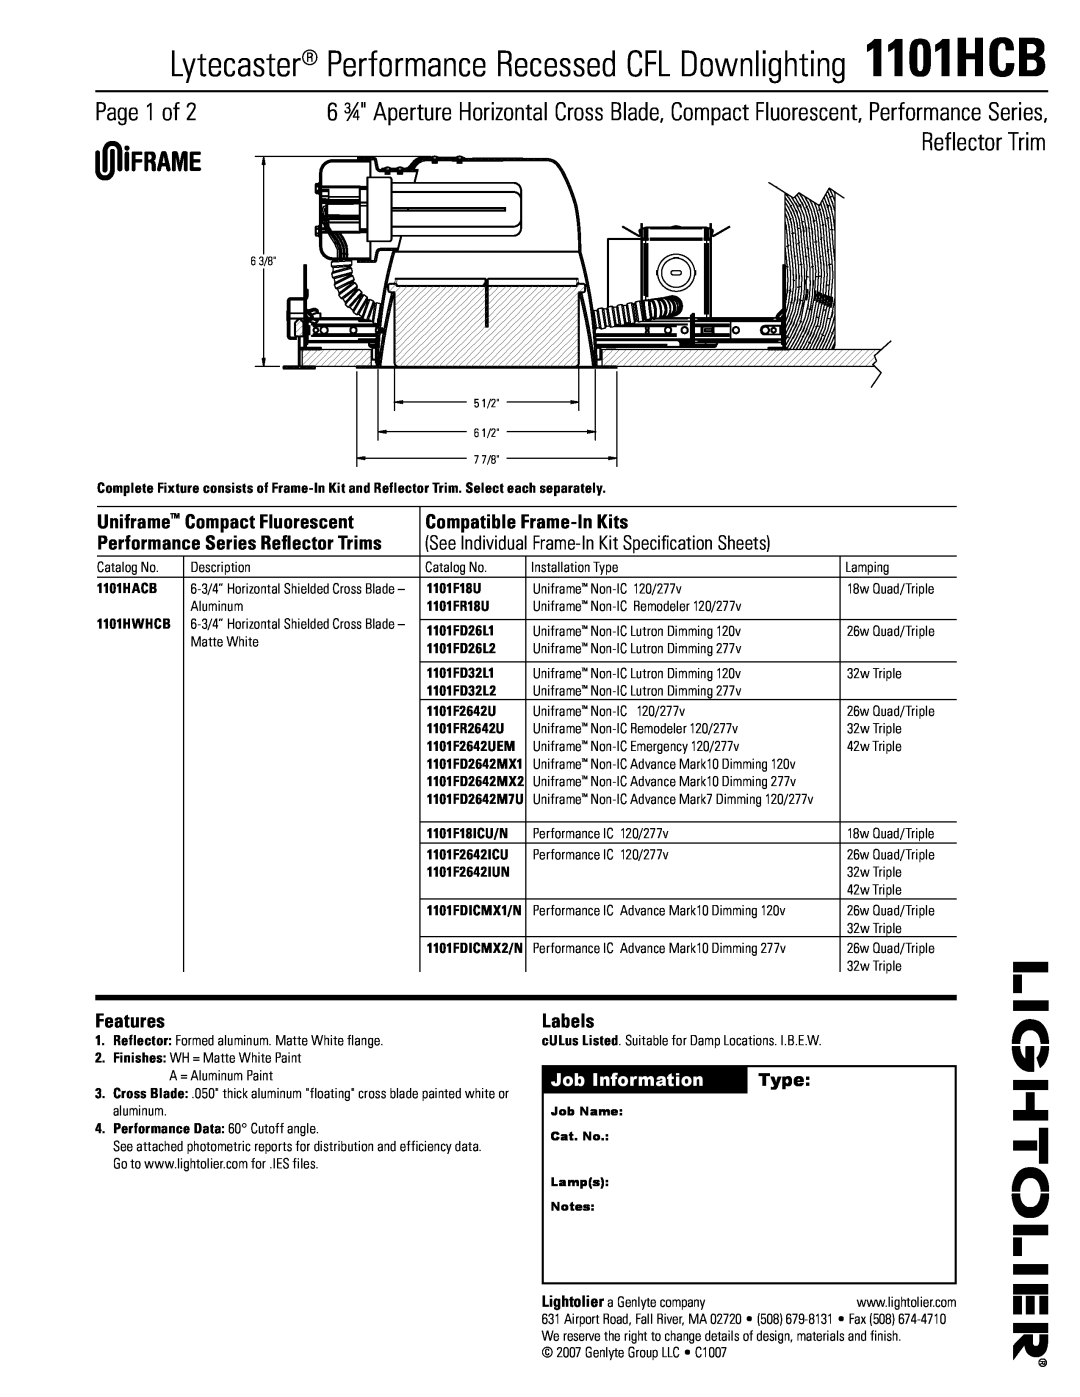 Lightolier 1101HCB specifications Uniframe Compact Fluorescent, Compatible Frame-InKits, Features, Labels, Job Information 